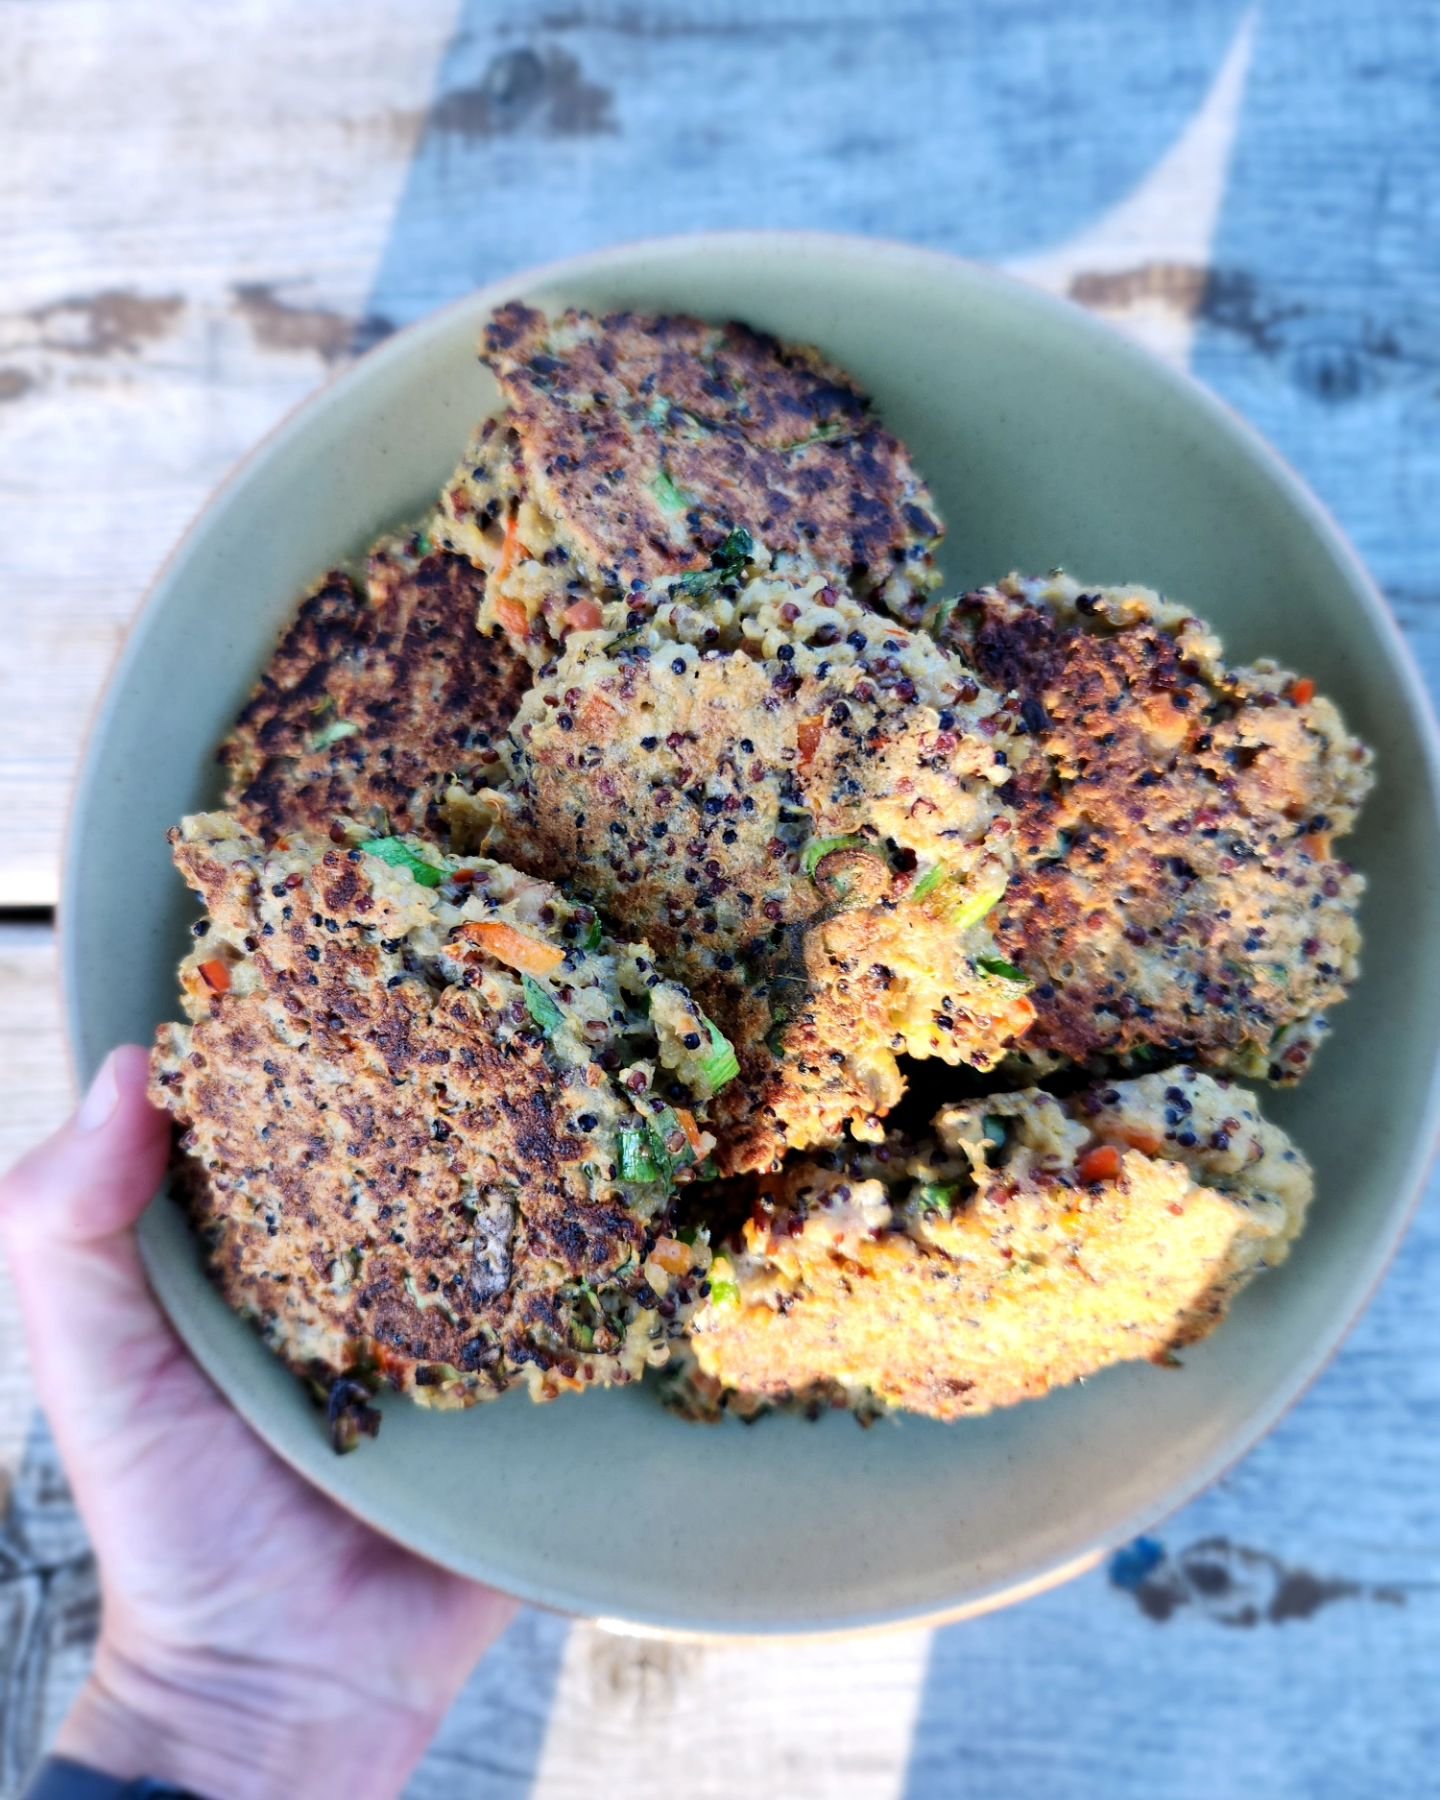 Recipe for your wanders!!

Quinoa Patties 

This has been an &ldquo;on repeat&rdquo; recipe for years.  These are quick and easy to make, and they hold up extremely well to toss in your freezer or pack in your cooler for a long weekend out camping.

